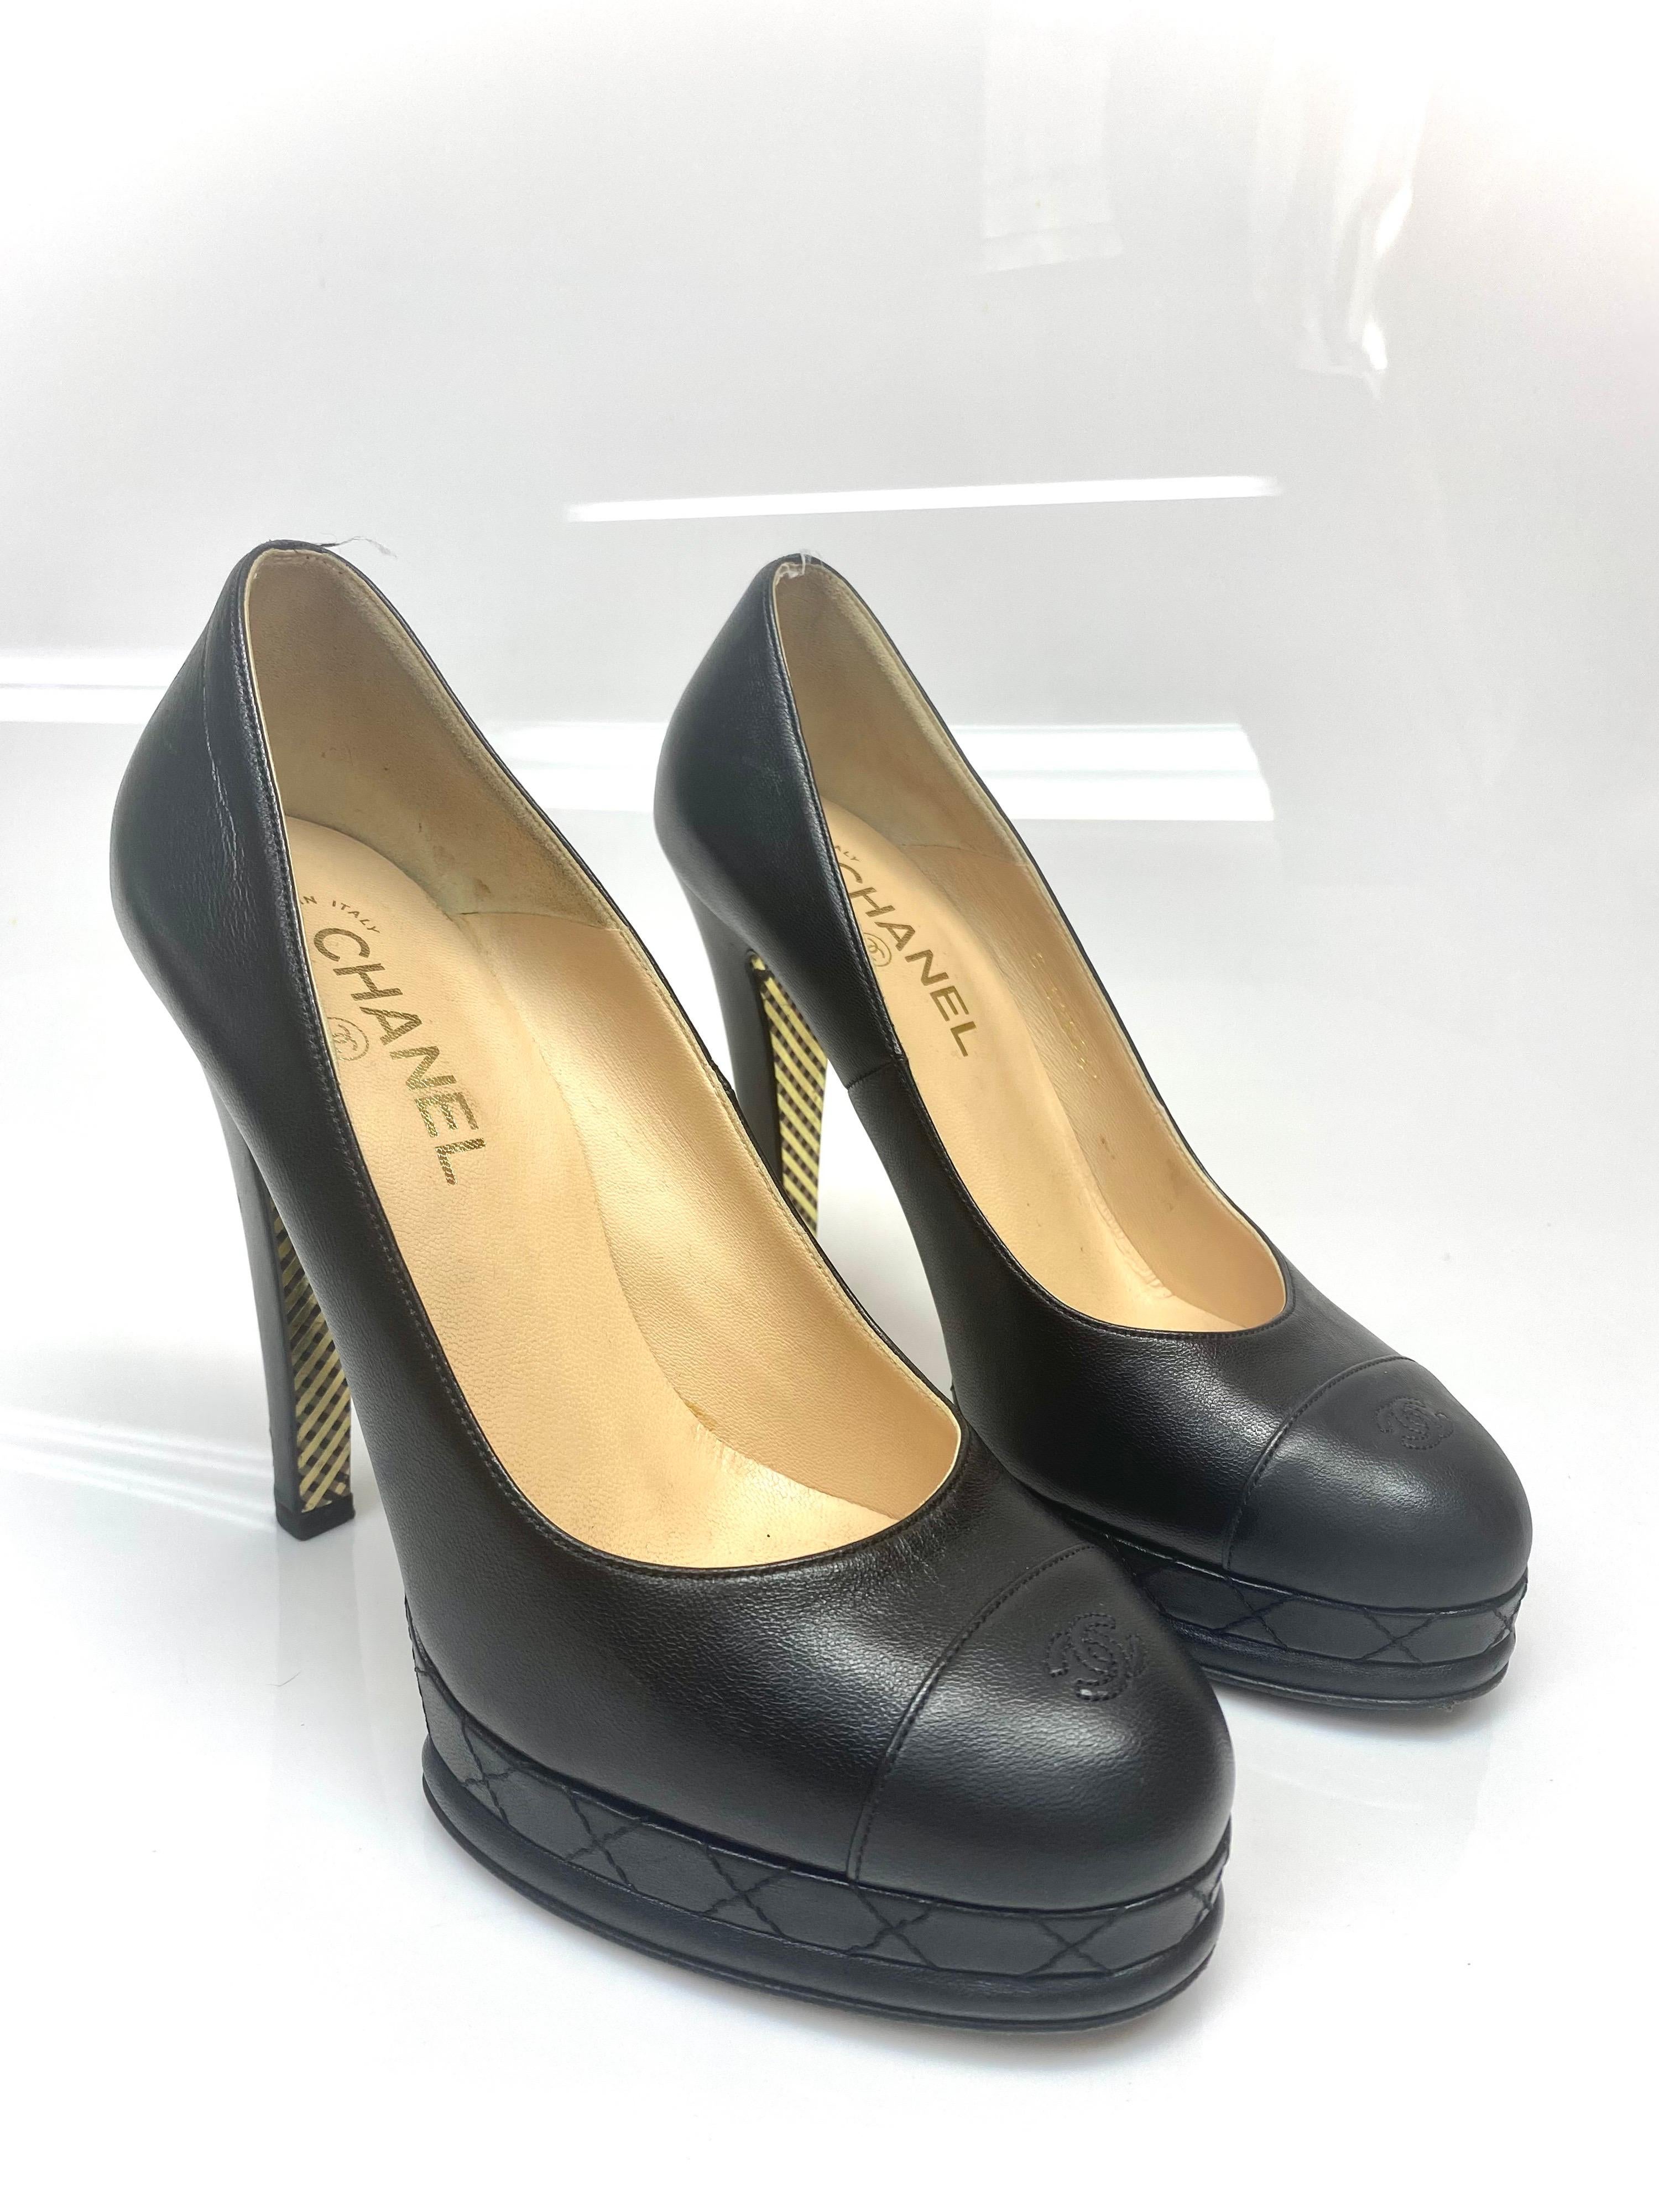 Chanel Black Leather Cap Toe Platform - 40 Take each step with style in these beautifully crafted platforms from Chanel. Crafted from leather, they carry a classic design of glossy cap toes and the signature CC on the counters. The insoles are